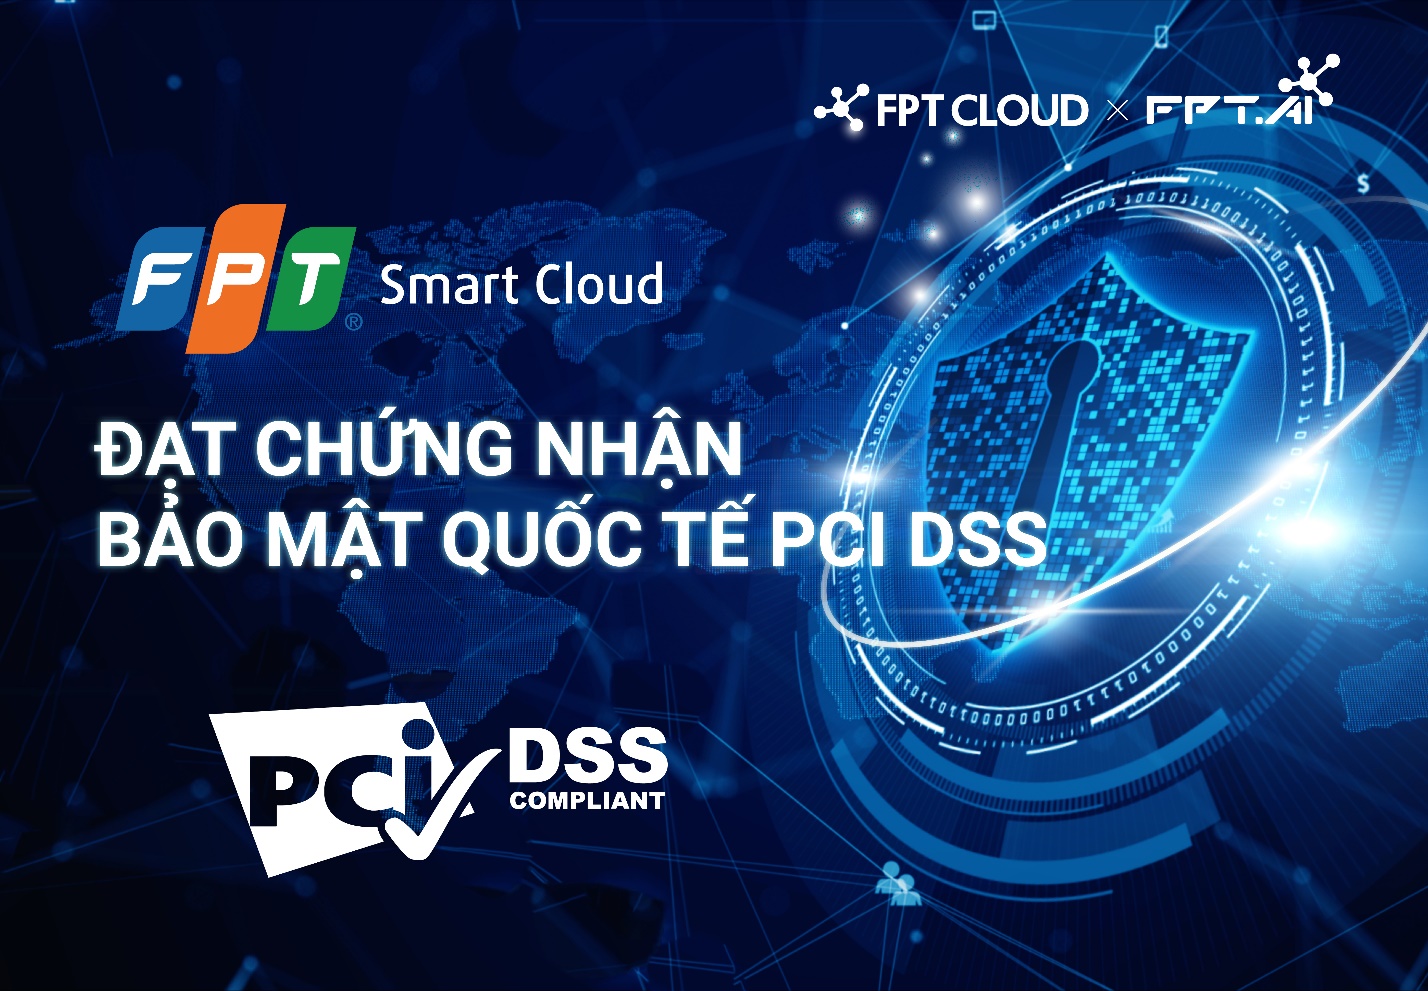 FPT Smart Cloud achieved the highest level of PCI DSS International Security certificate - Photo 1.